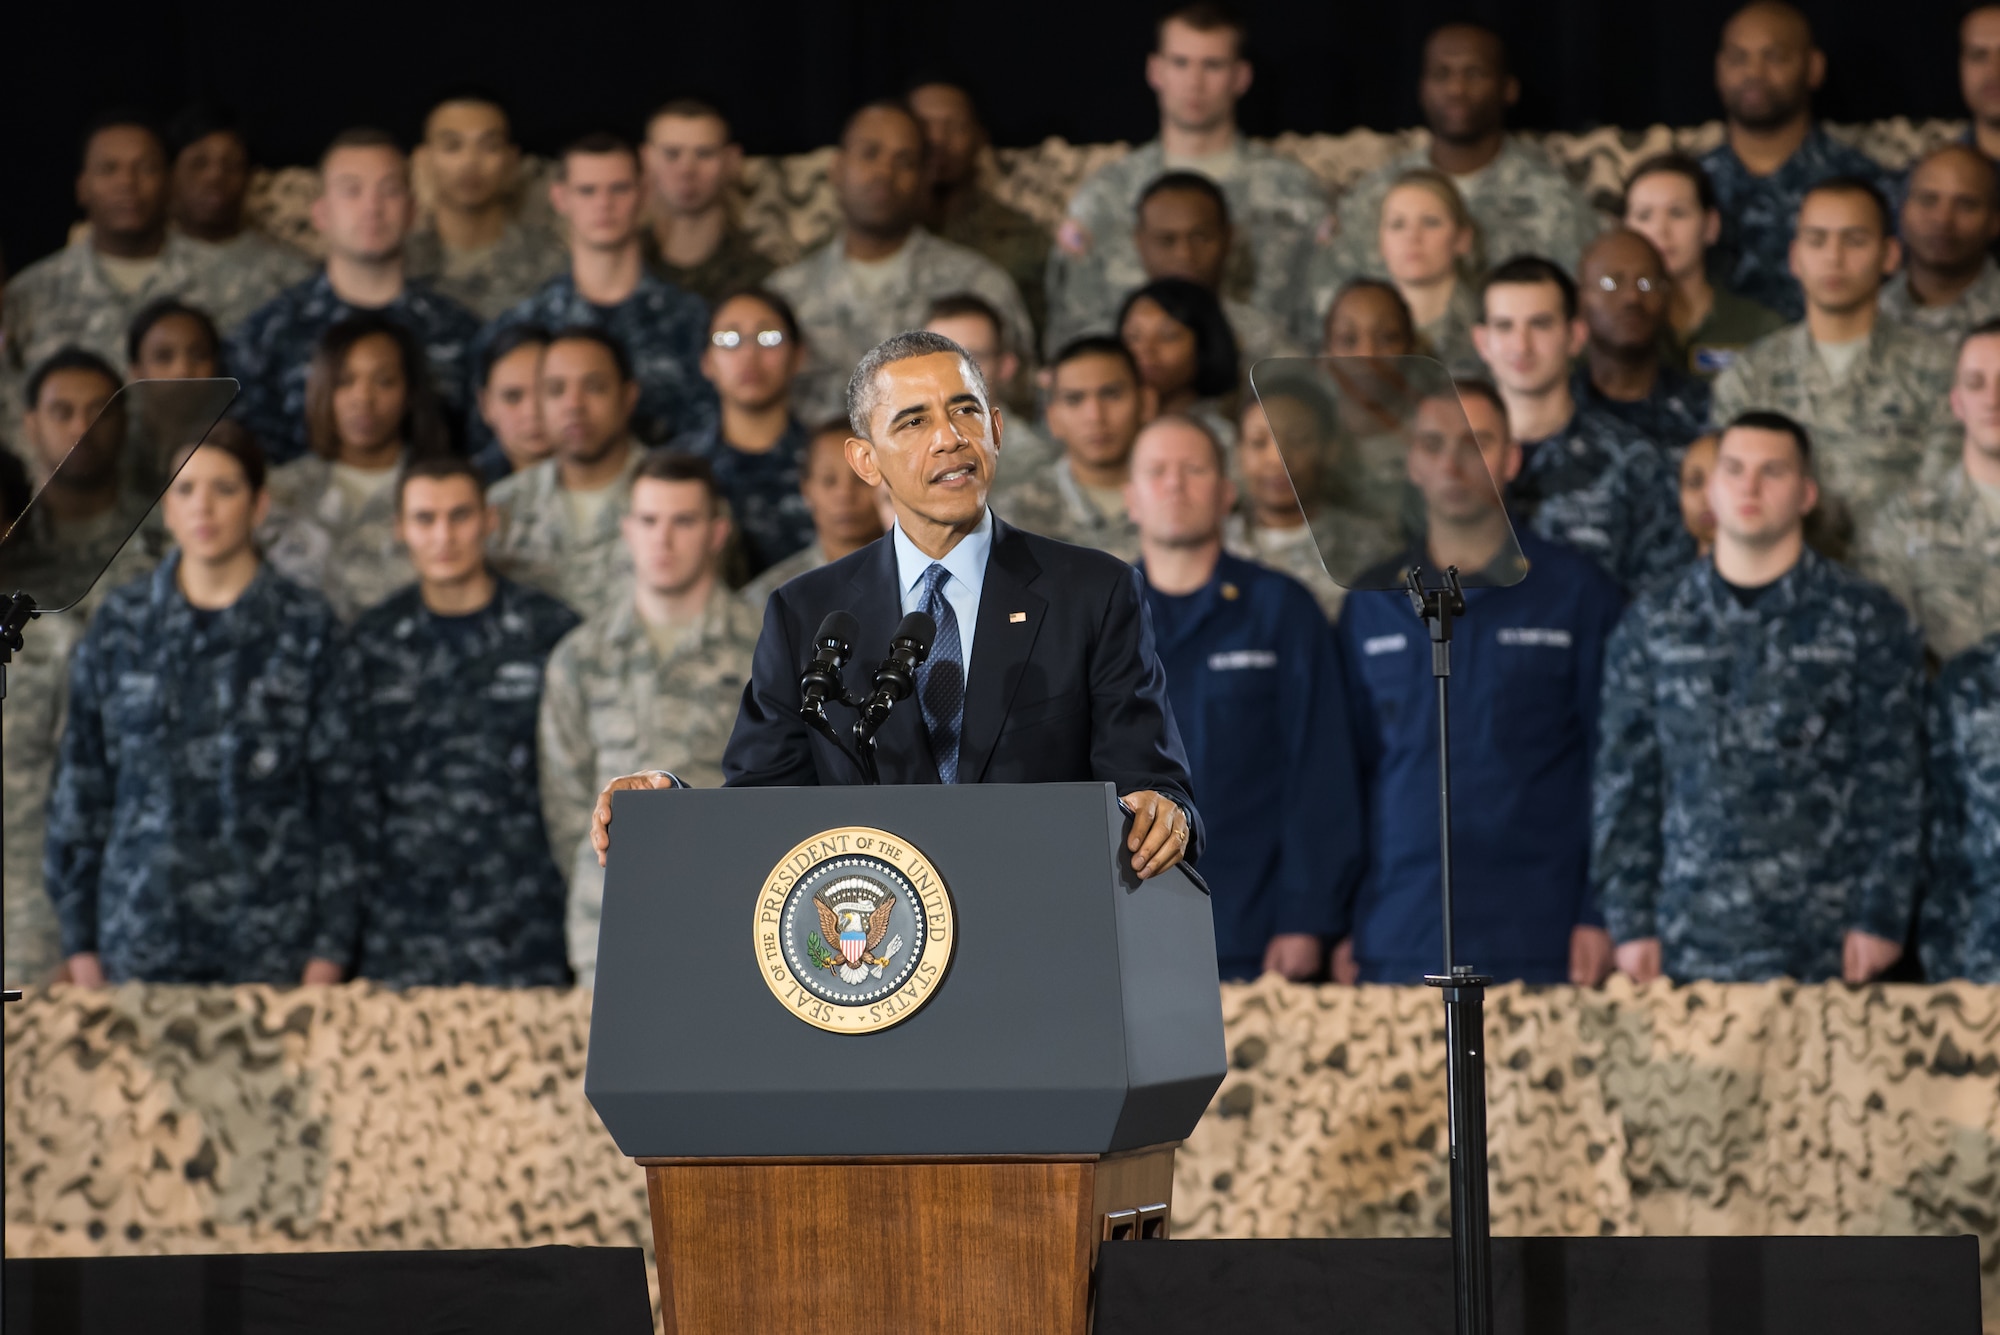 President Barack Obama addresses a crowd of service members and Defense Department civilians Dec. 15, 2014, at Joint Base McGuire-Dix-Lakehurst, N.J. The event allowed more than 3,000 military and civilian personnel to listen to their commander in chief discuss current conflicts and mission readiness, but more importantly thank the attendees for their service and dedication to their nation. (U.S. Air Force photo/Russ Meseroll)